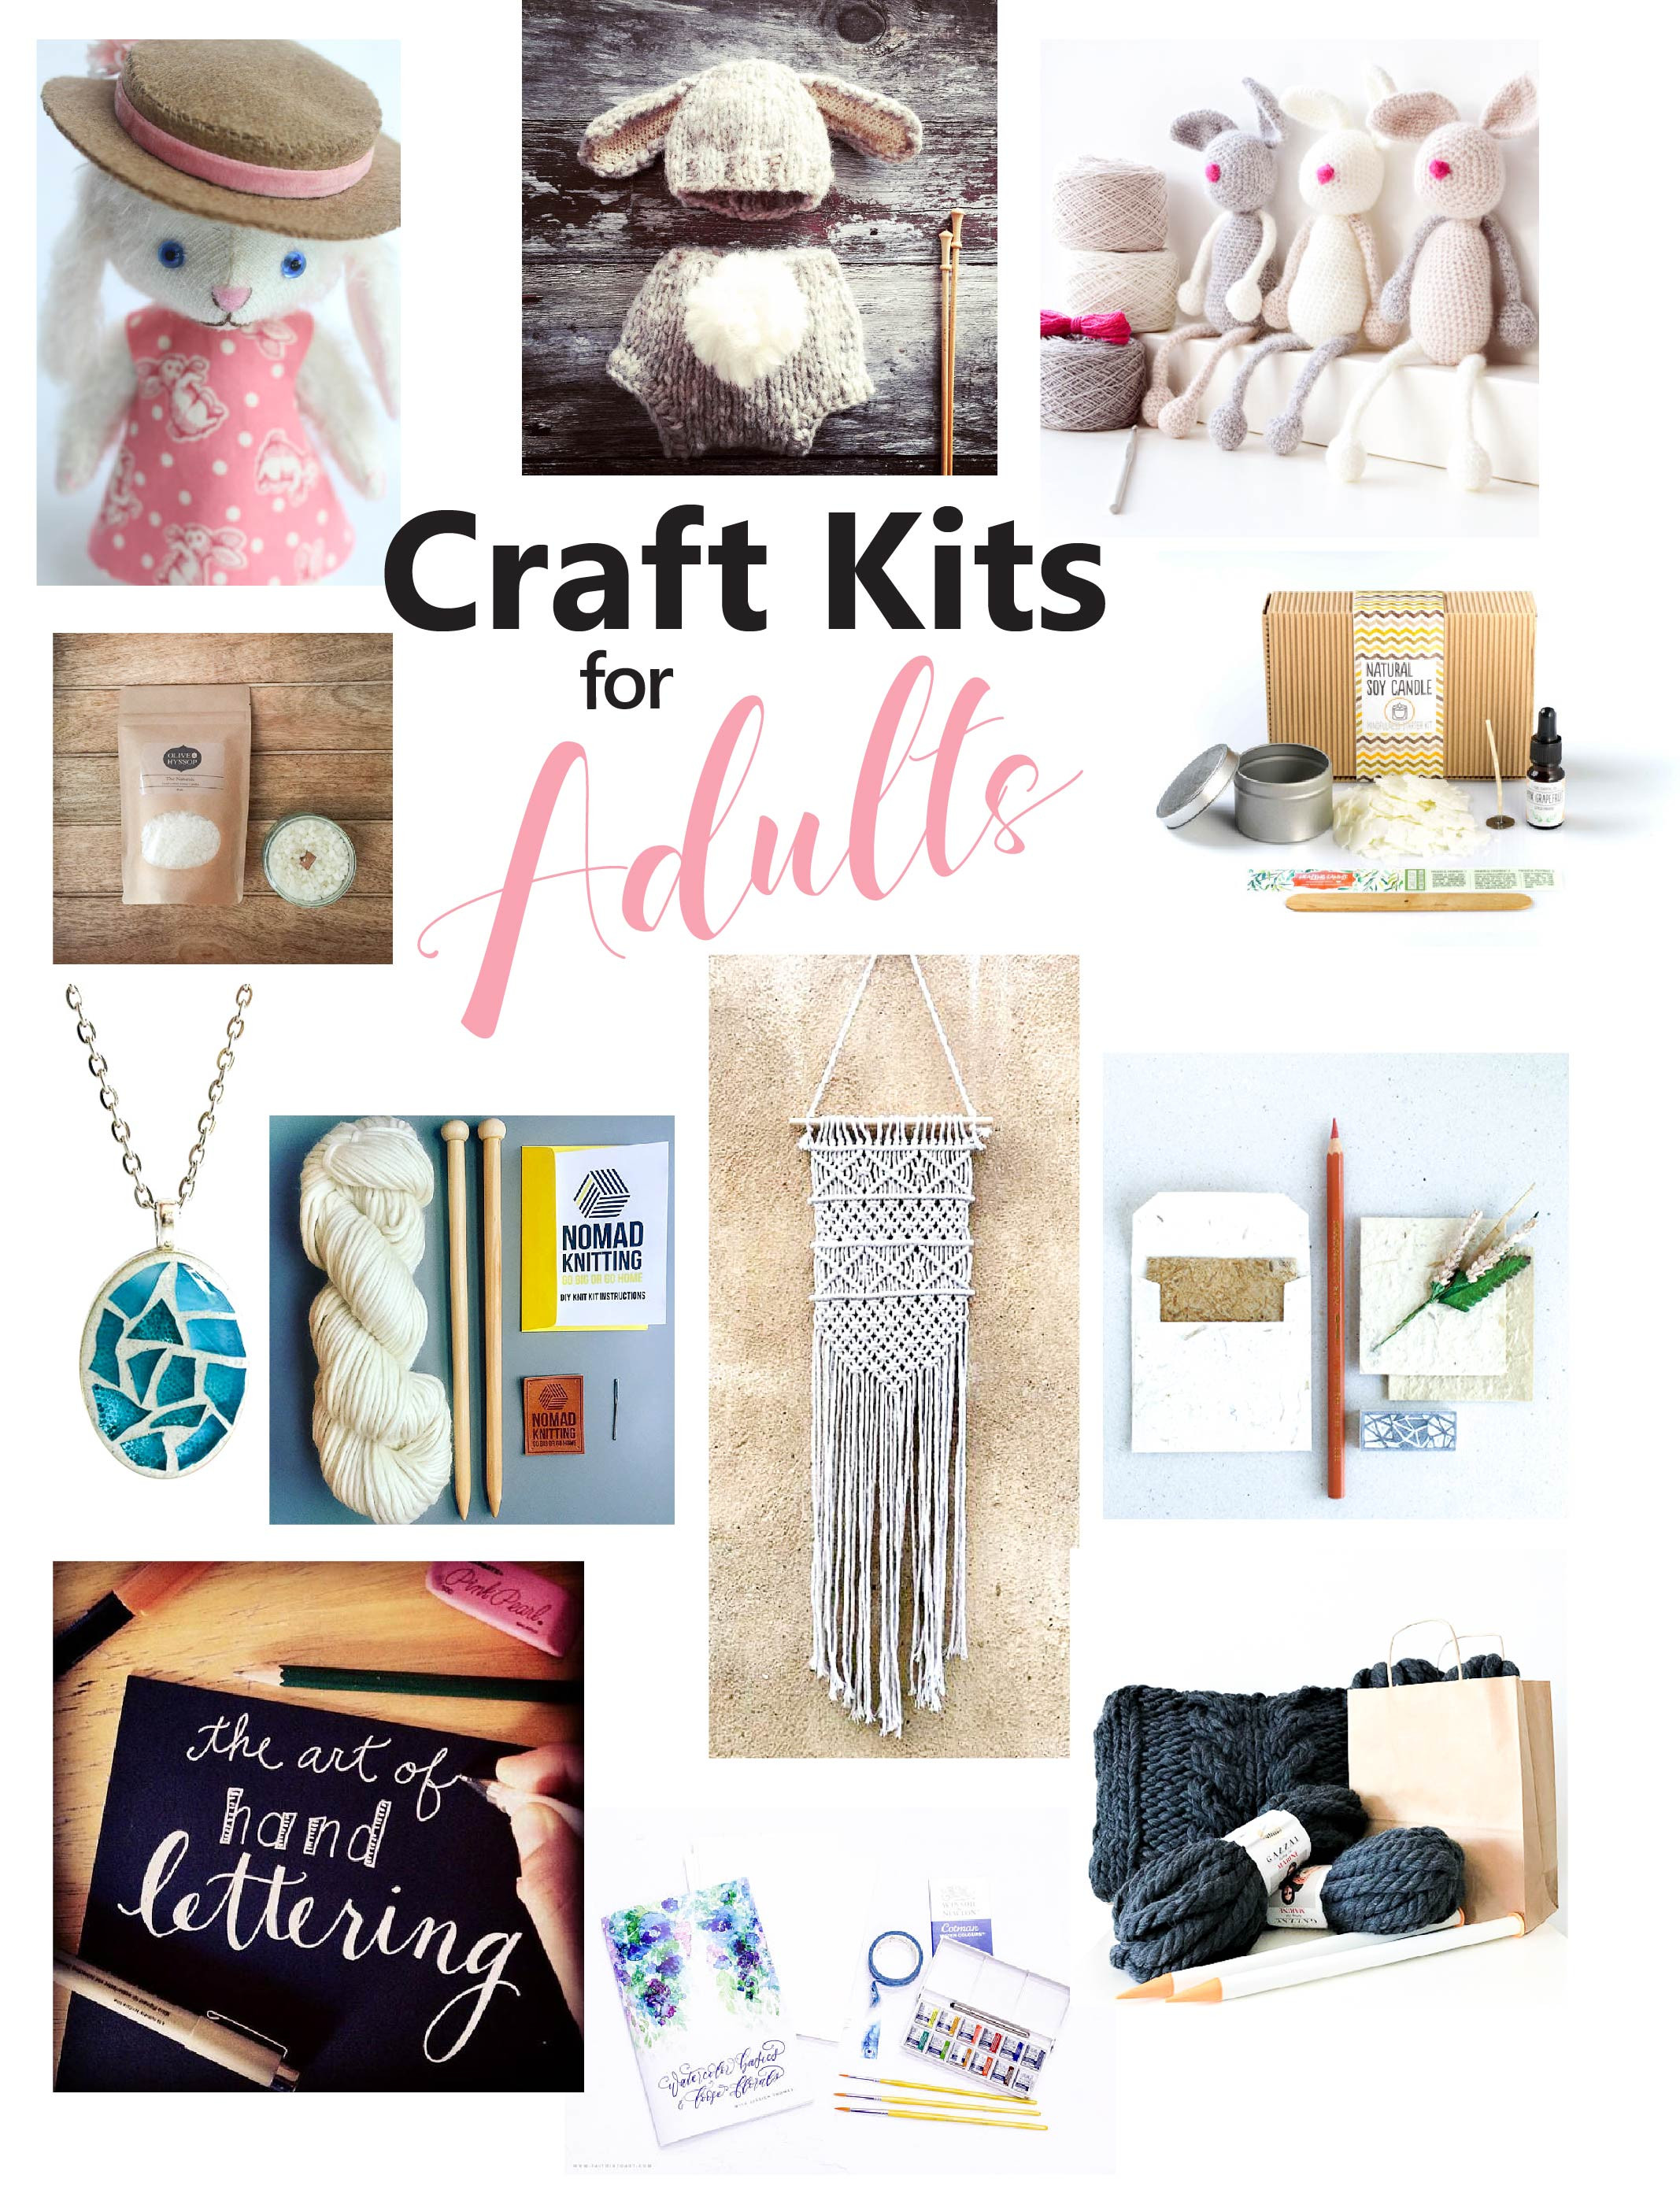 Craft Kits For Adults
 The Best Craft Kits for Adults – Sustain My Craft Habit